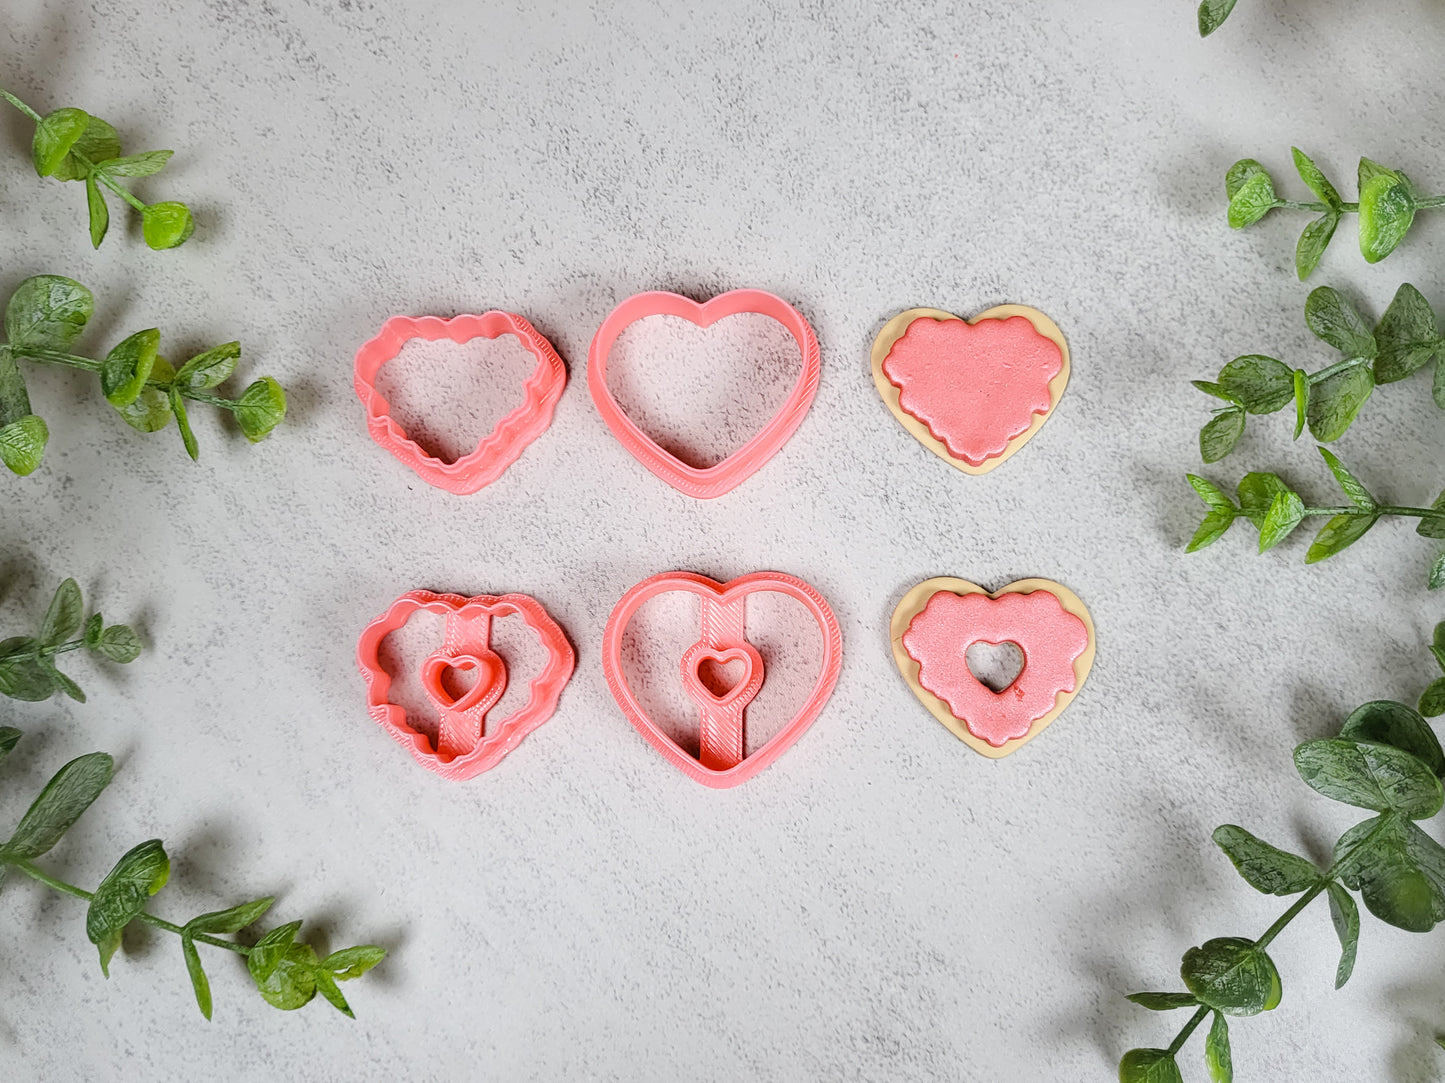 Donut Heart Polymer Clay Cutters